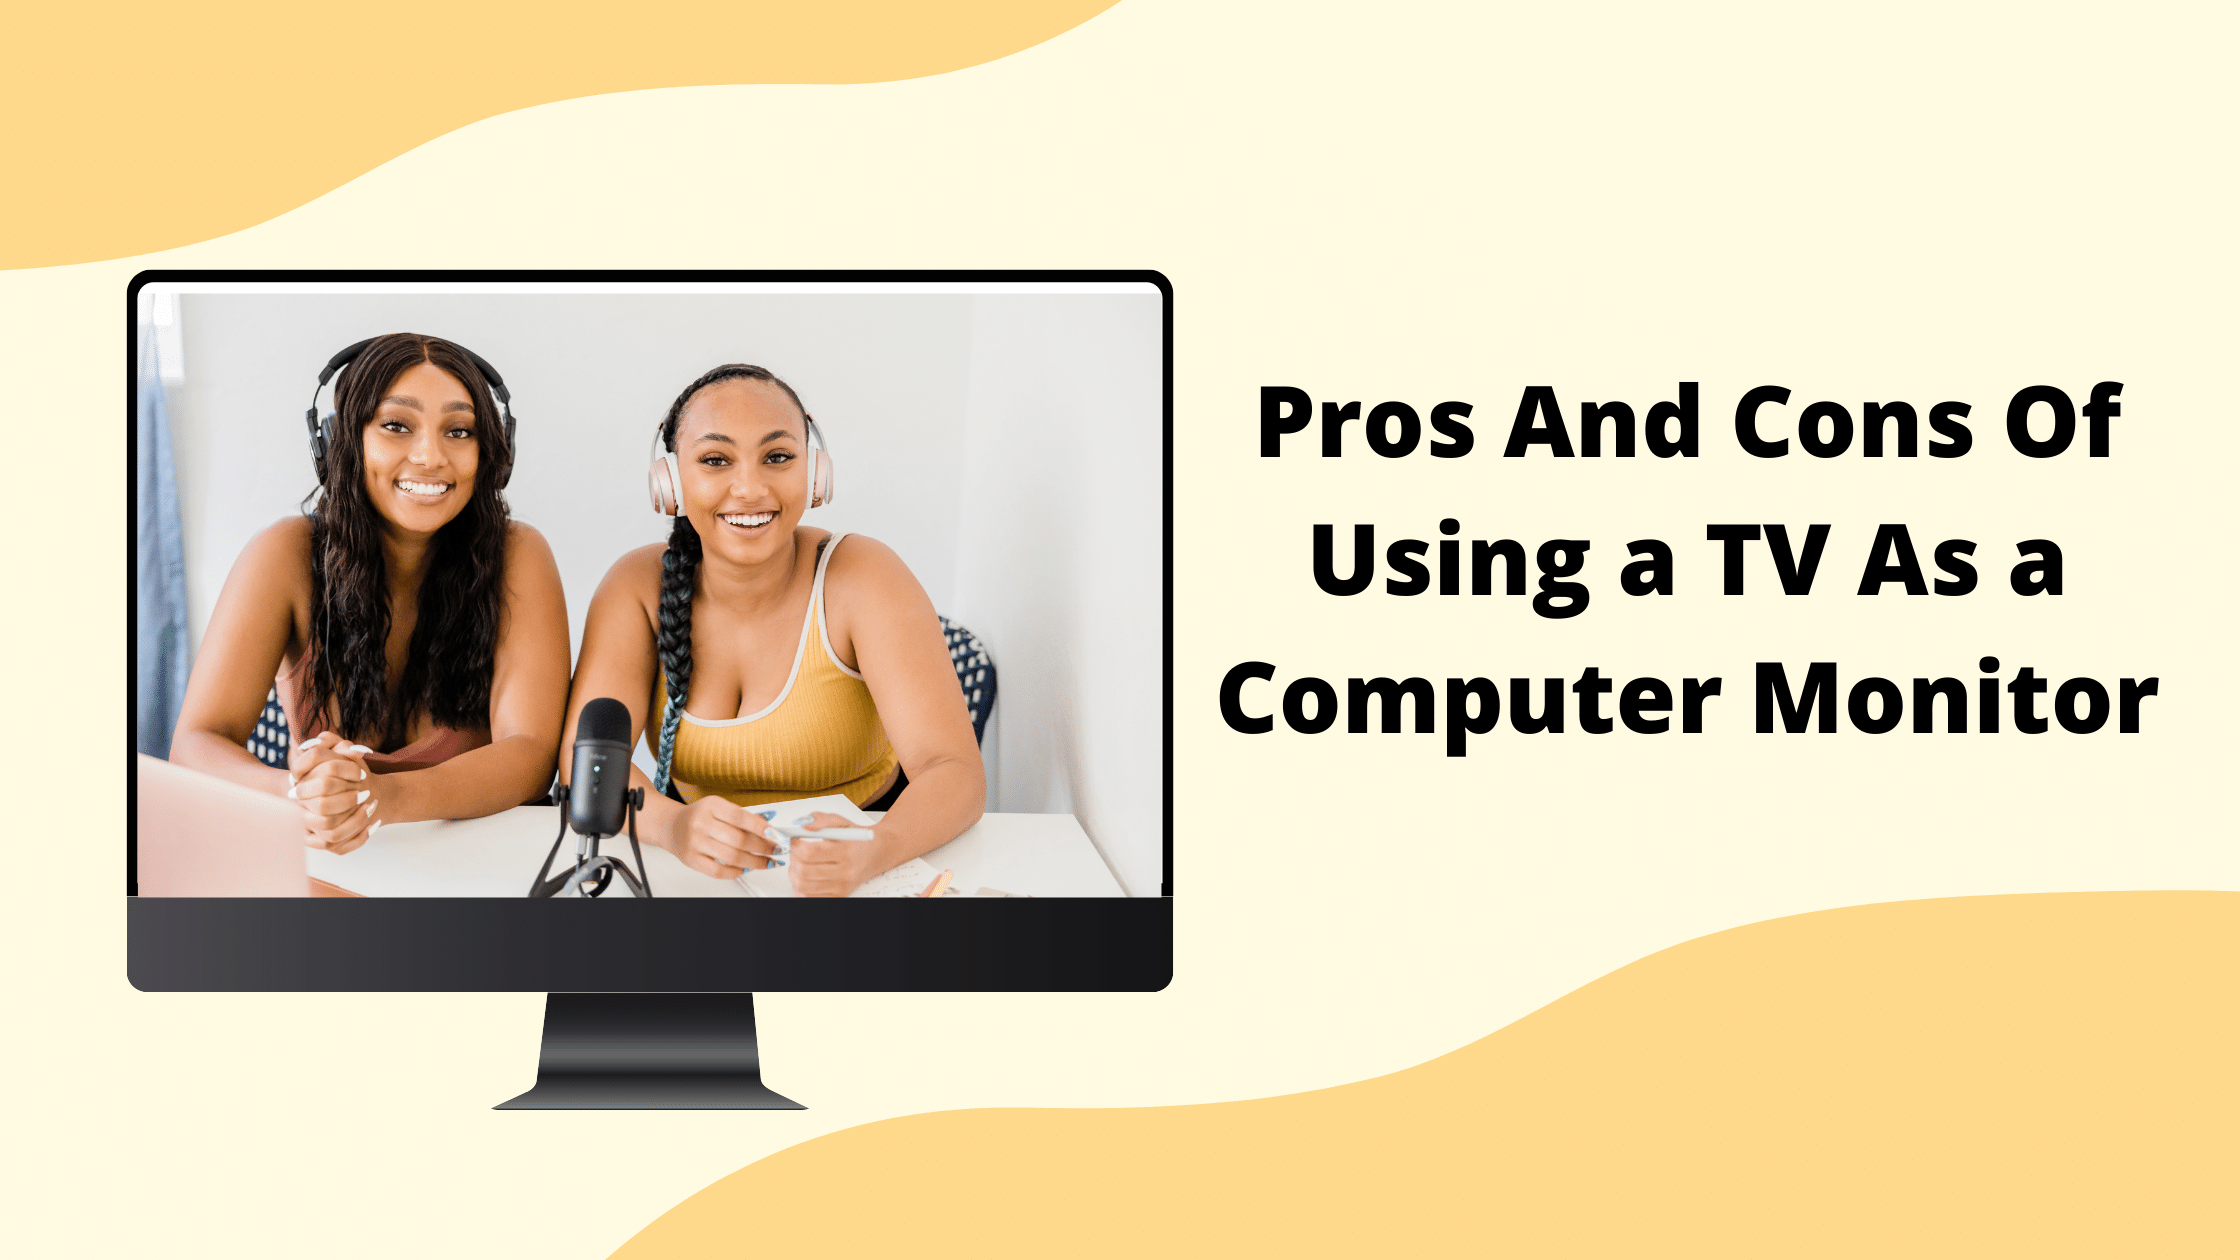 Pros And Cons Of Using a TV As a Computer Monitor